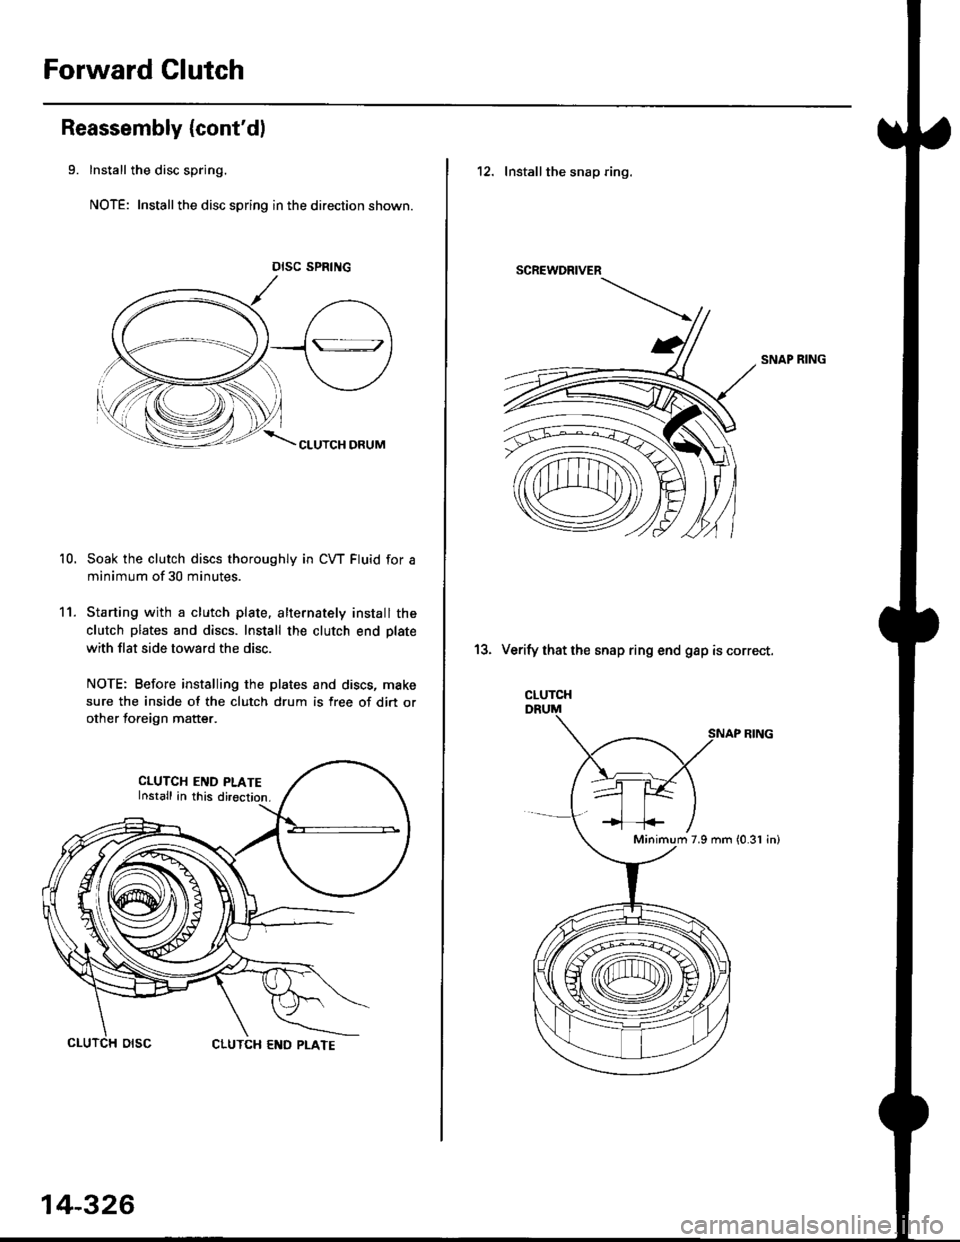 HONDA CIVIC 1996 6.G Workshop Manual Forward Clutch
Reassembly {contd)
9. Install the disc spring.
NOTE: Installthe disc spring in the direction shown.
- "arr"" o"u*
11.
Soak the clutch discs thoroughly in CW Fluid for a
minimum of 30 m